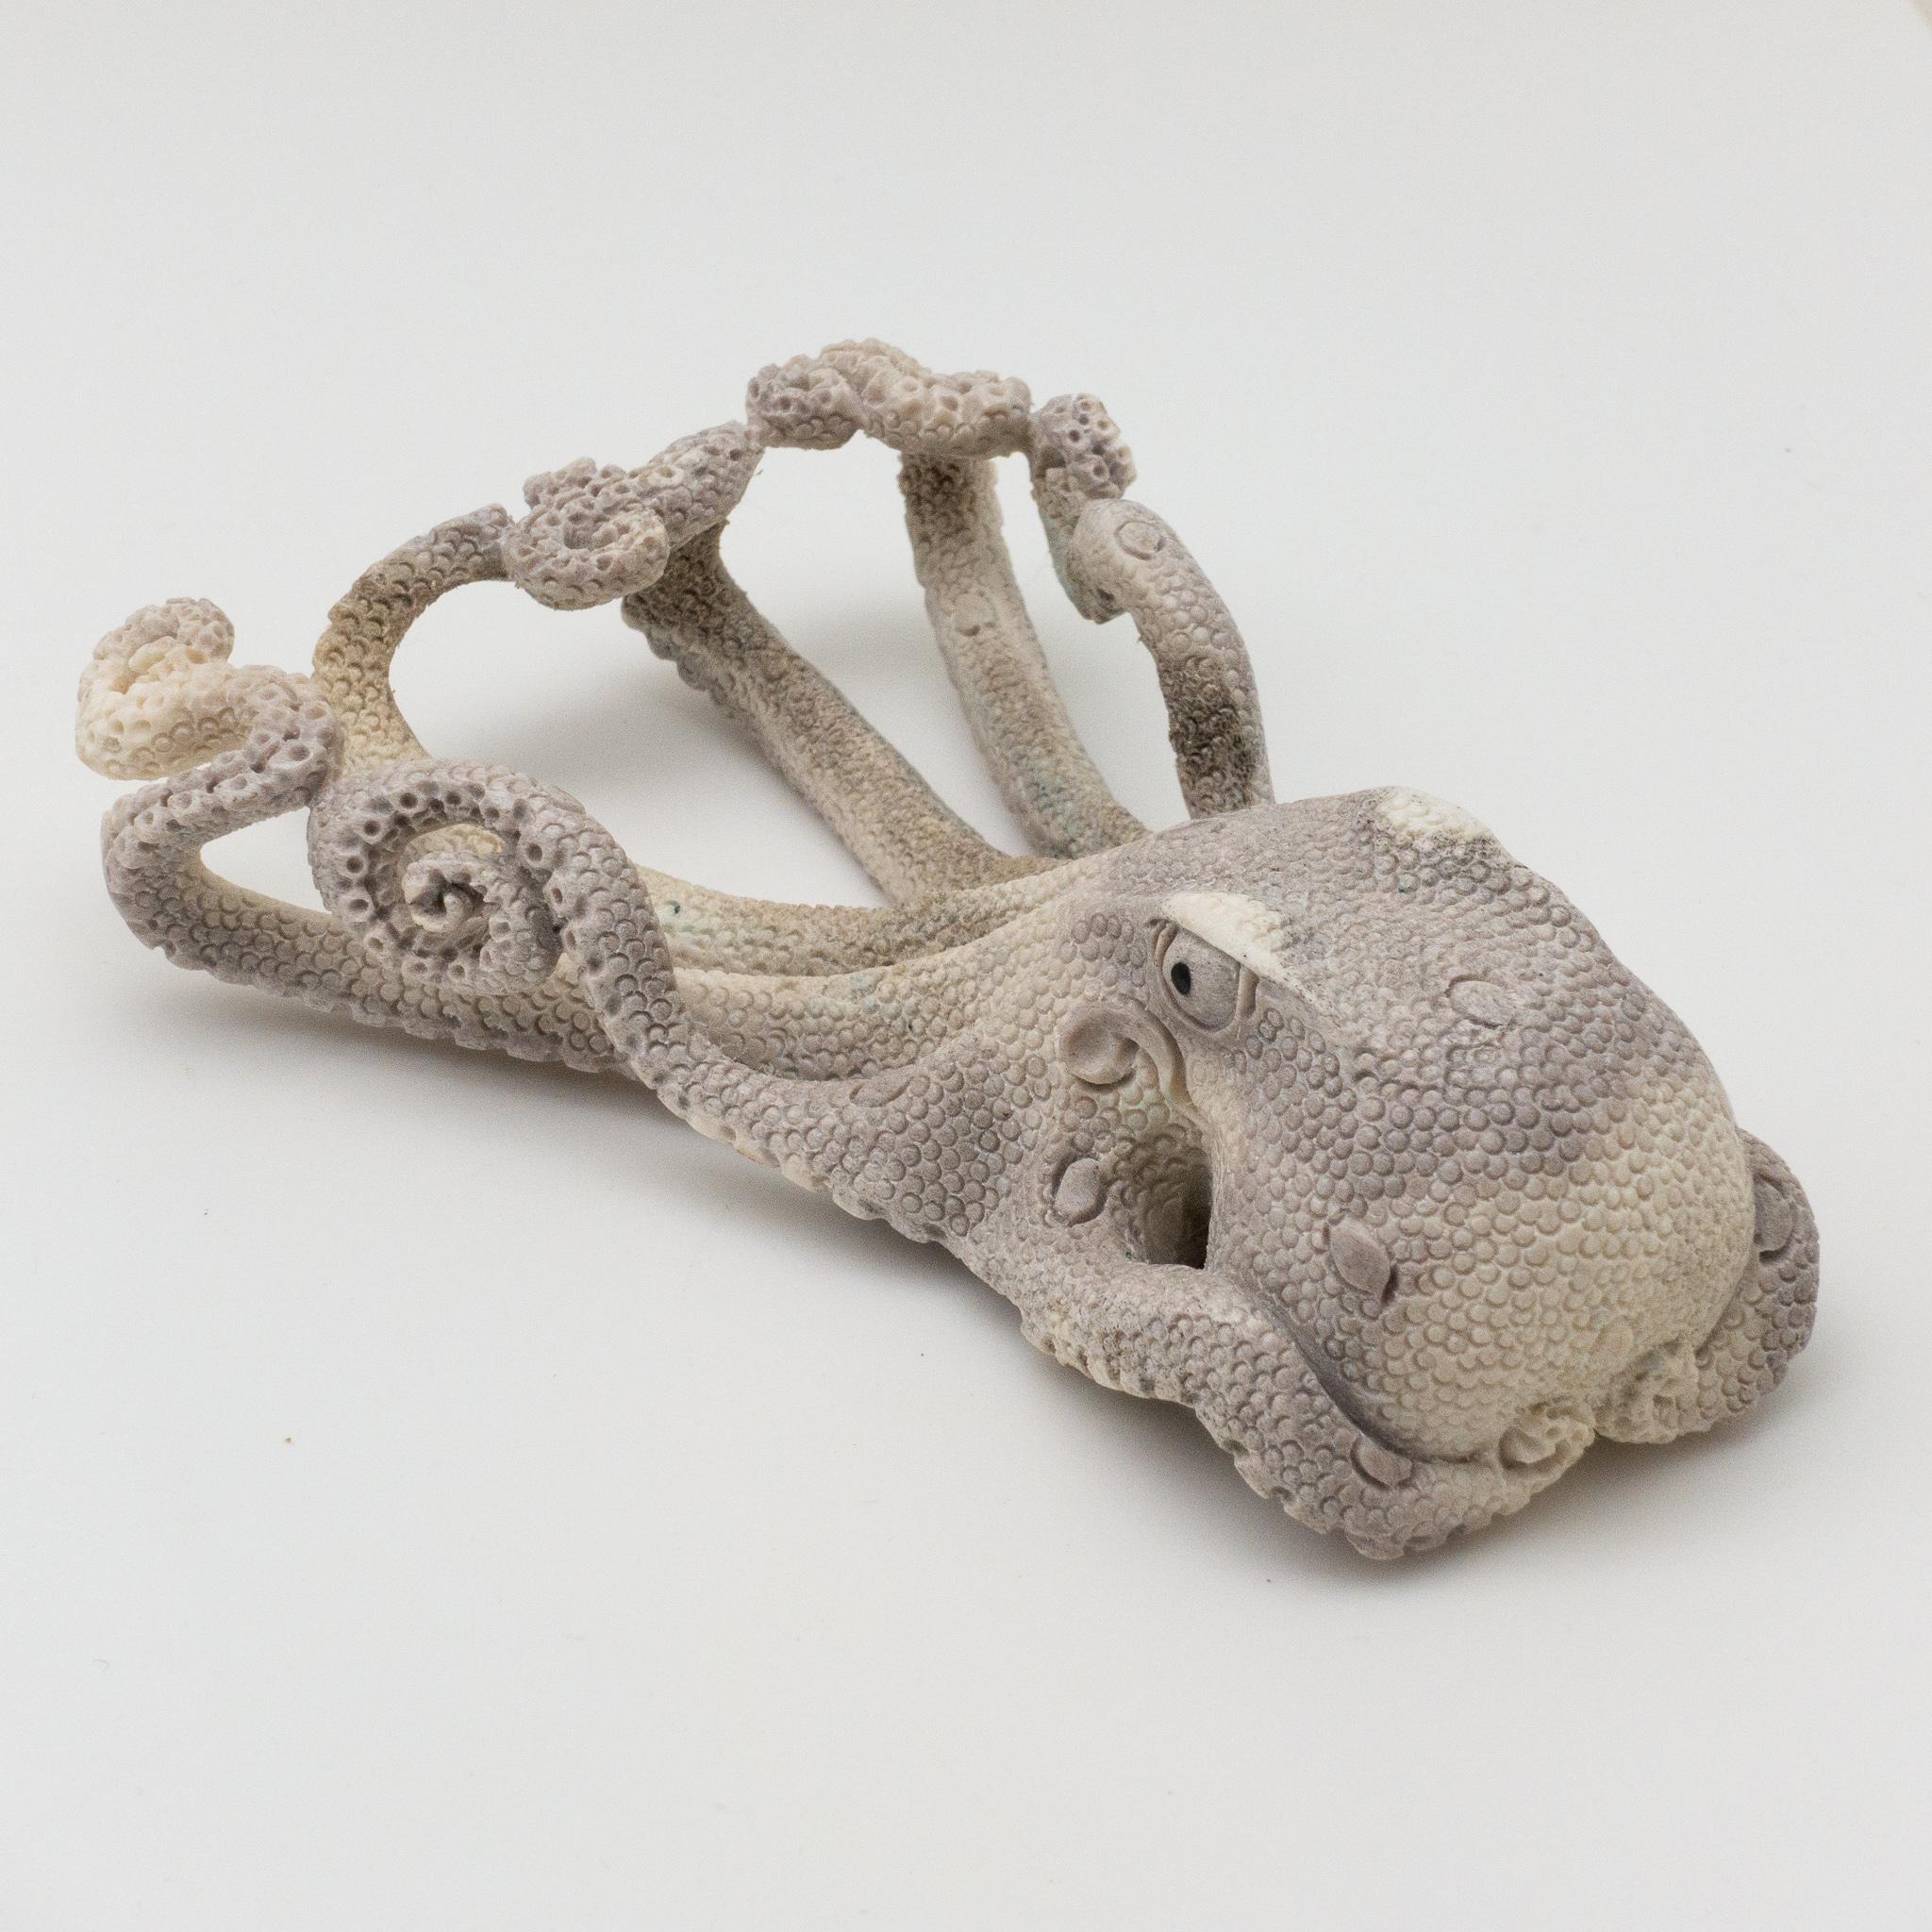 Detailed moose antler carving of an octopus, from Indonesia. This is a one of a kind object. The moose antler was sourced in North America and then sent to Asia for carving. Quality of ivory, but with sustainability, as the moose naturally shed